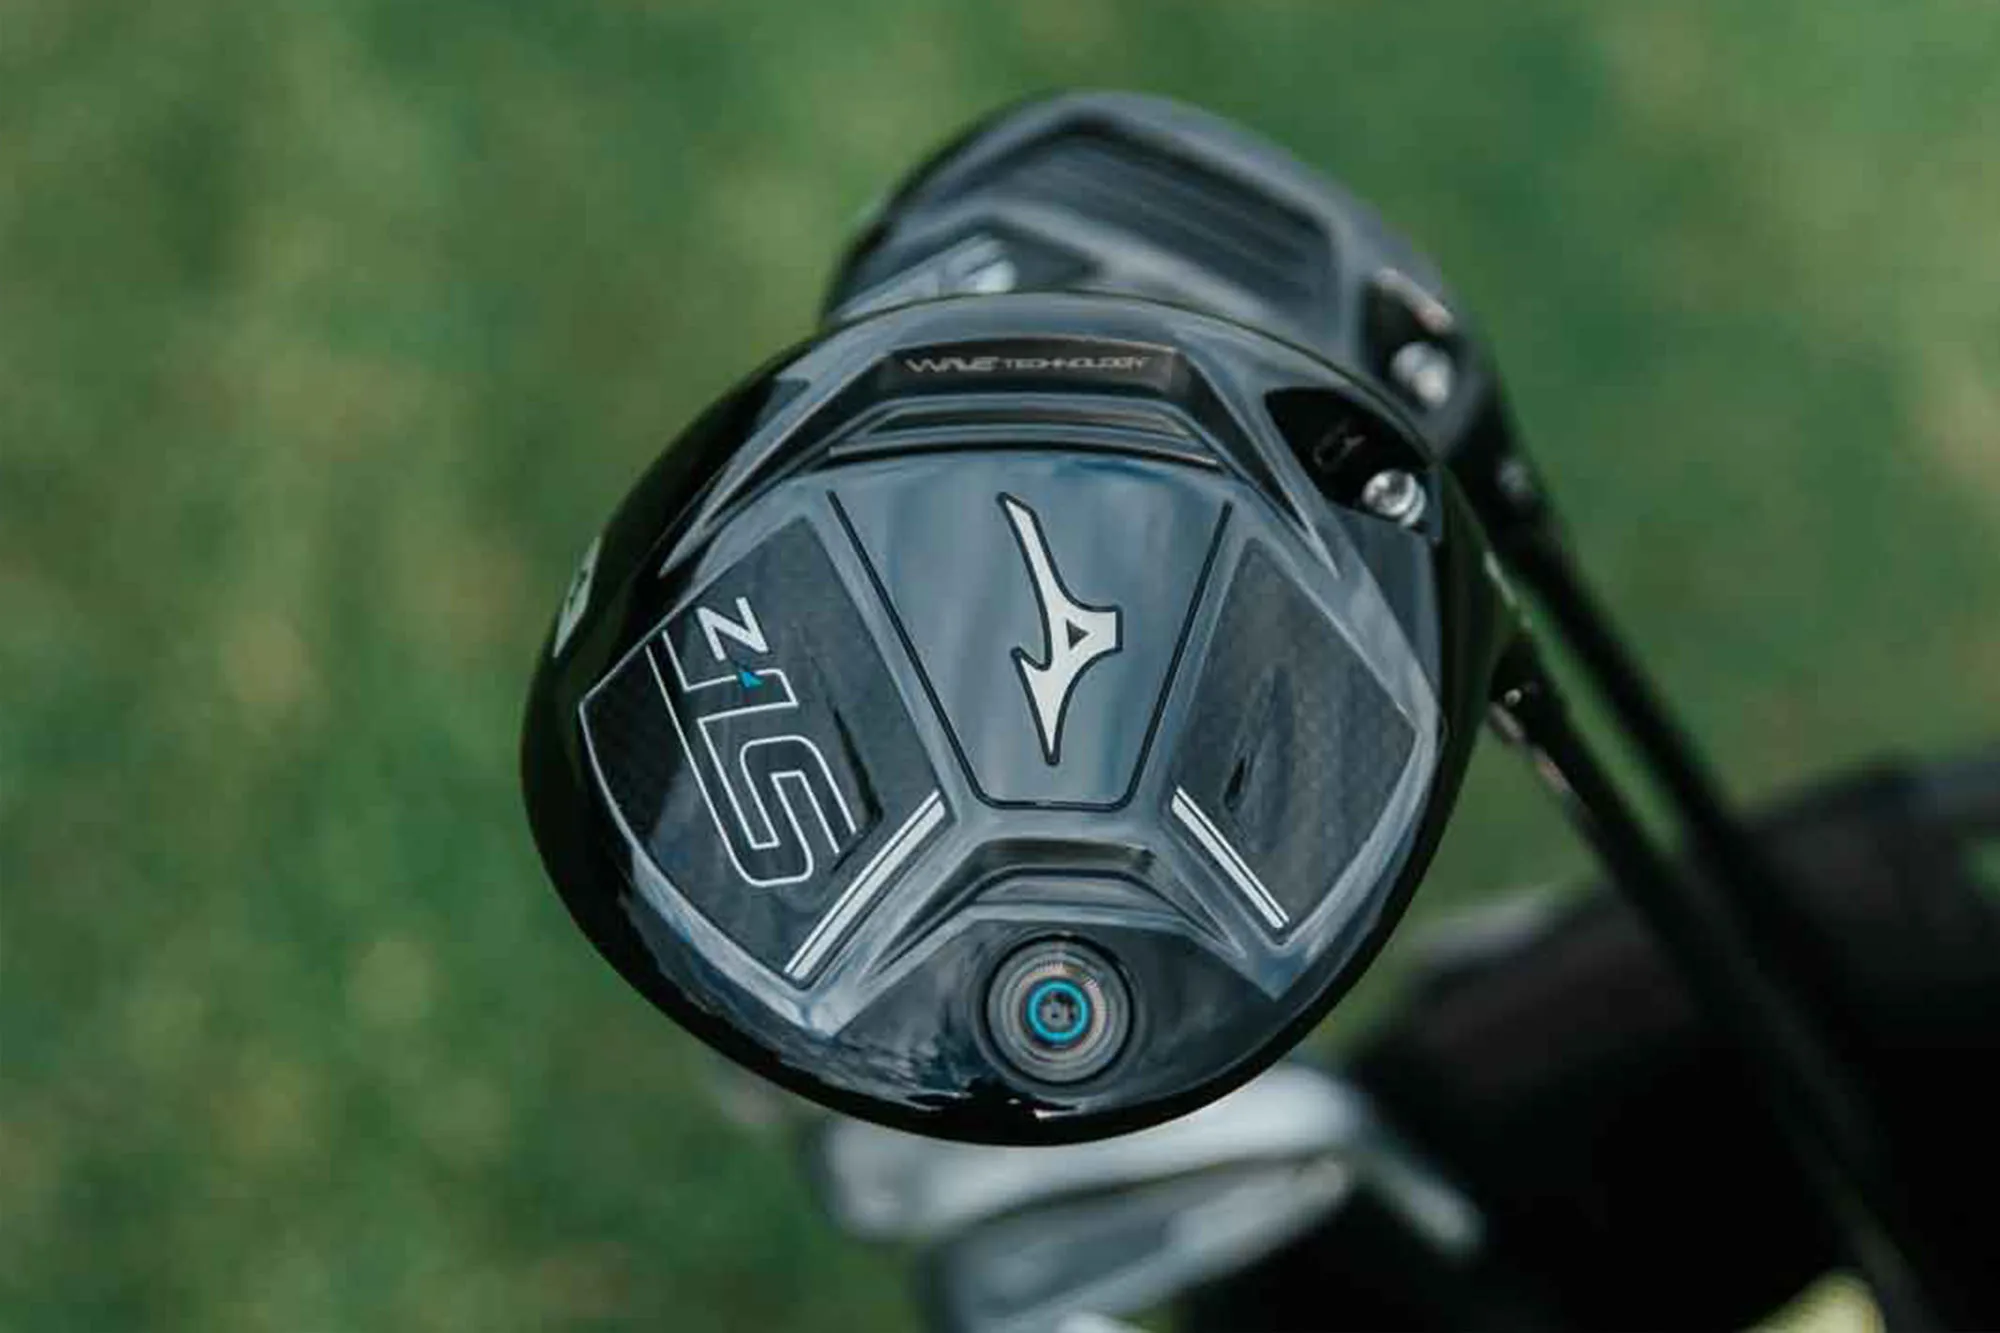 Mizuno ST-Z driver and fairway wood review: Nothing feels like a Mizuno - but how do they perform?